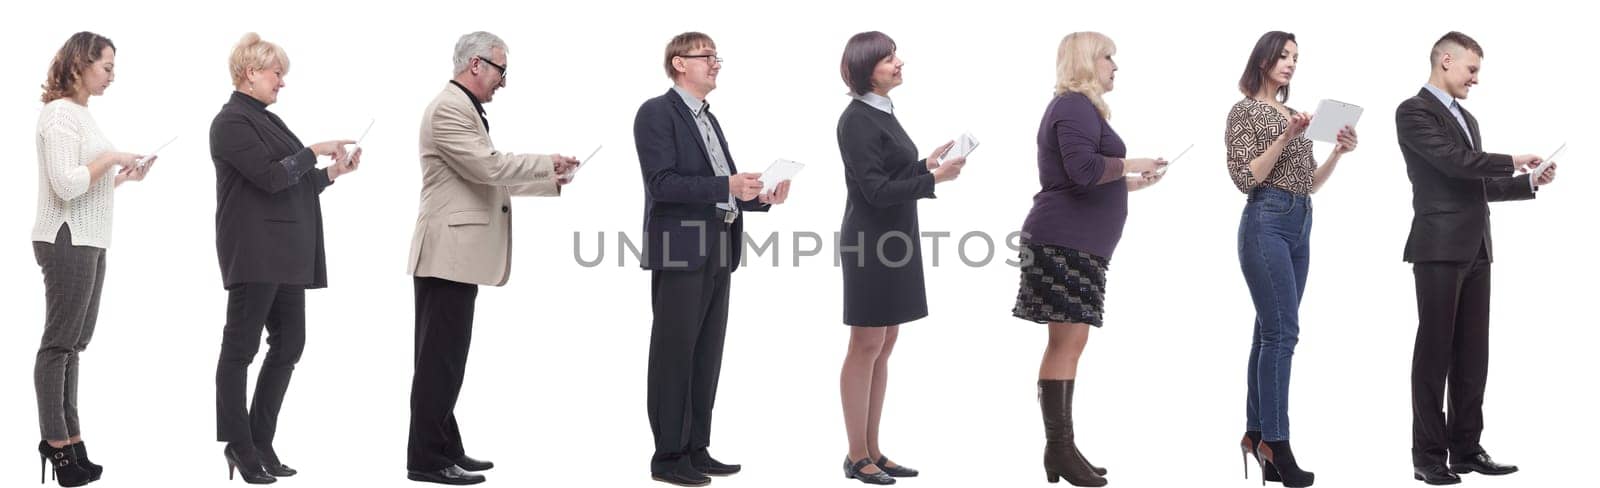 group of people holding tablet and looking ahead isolated on white background